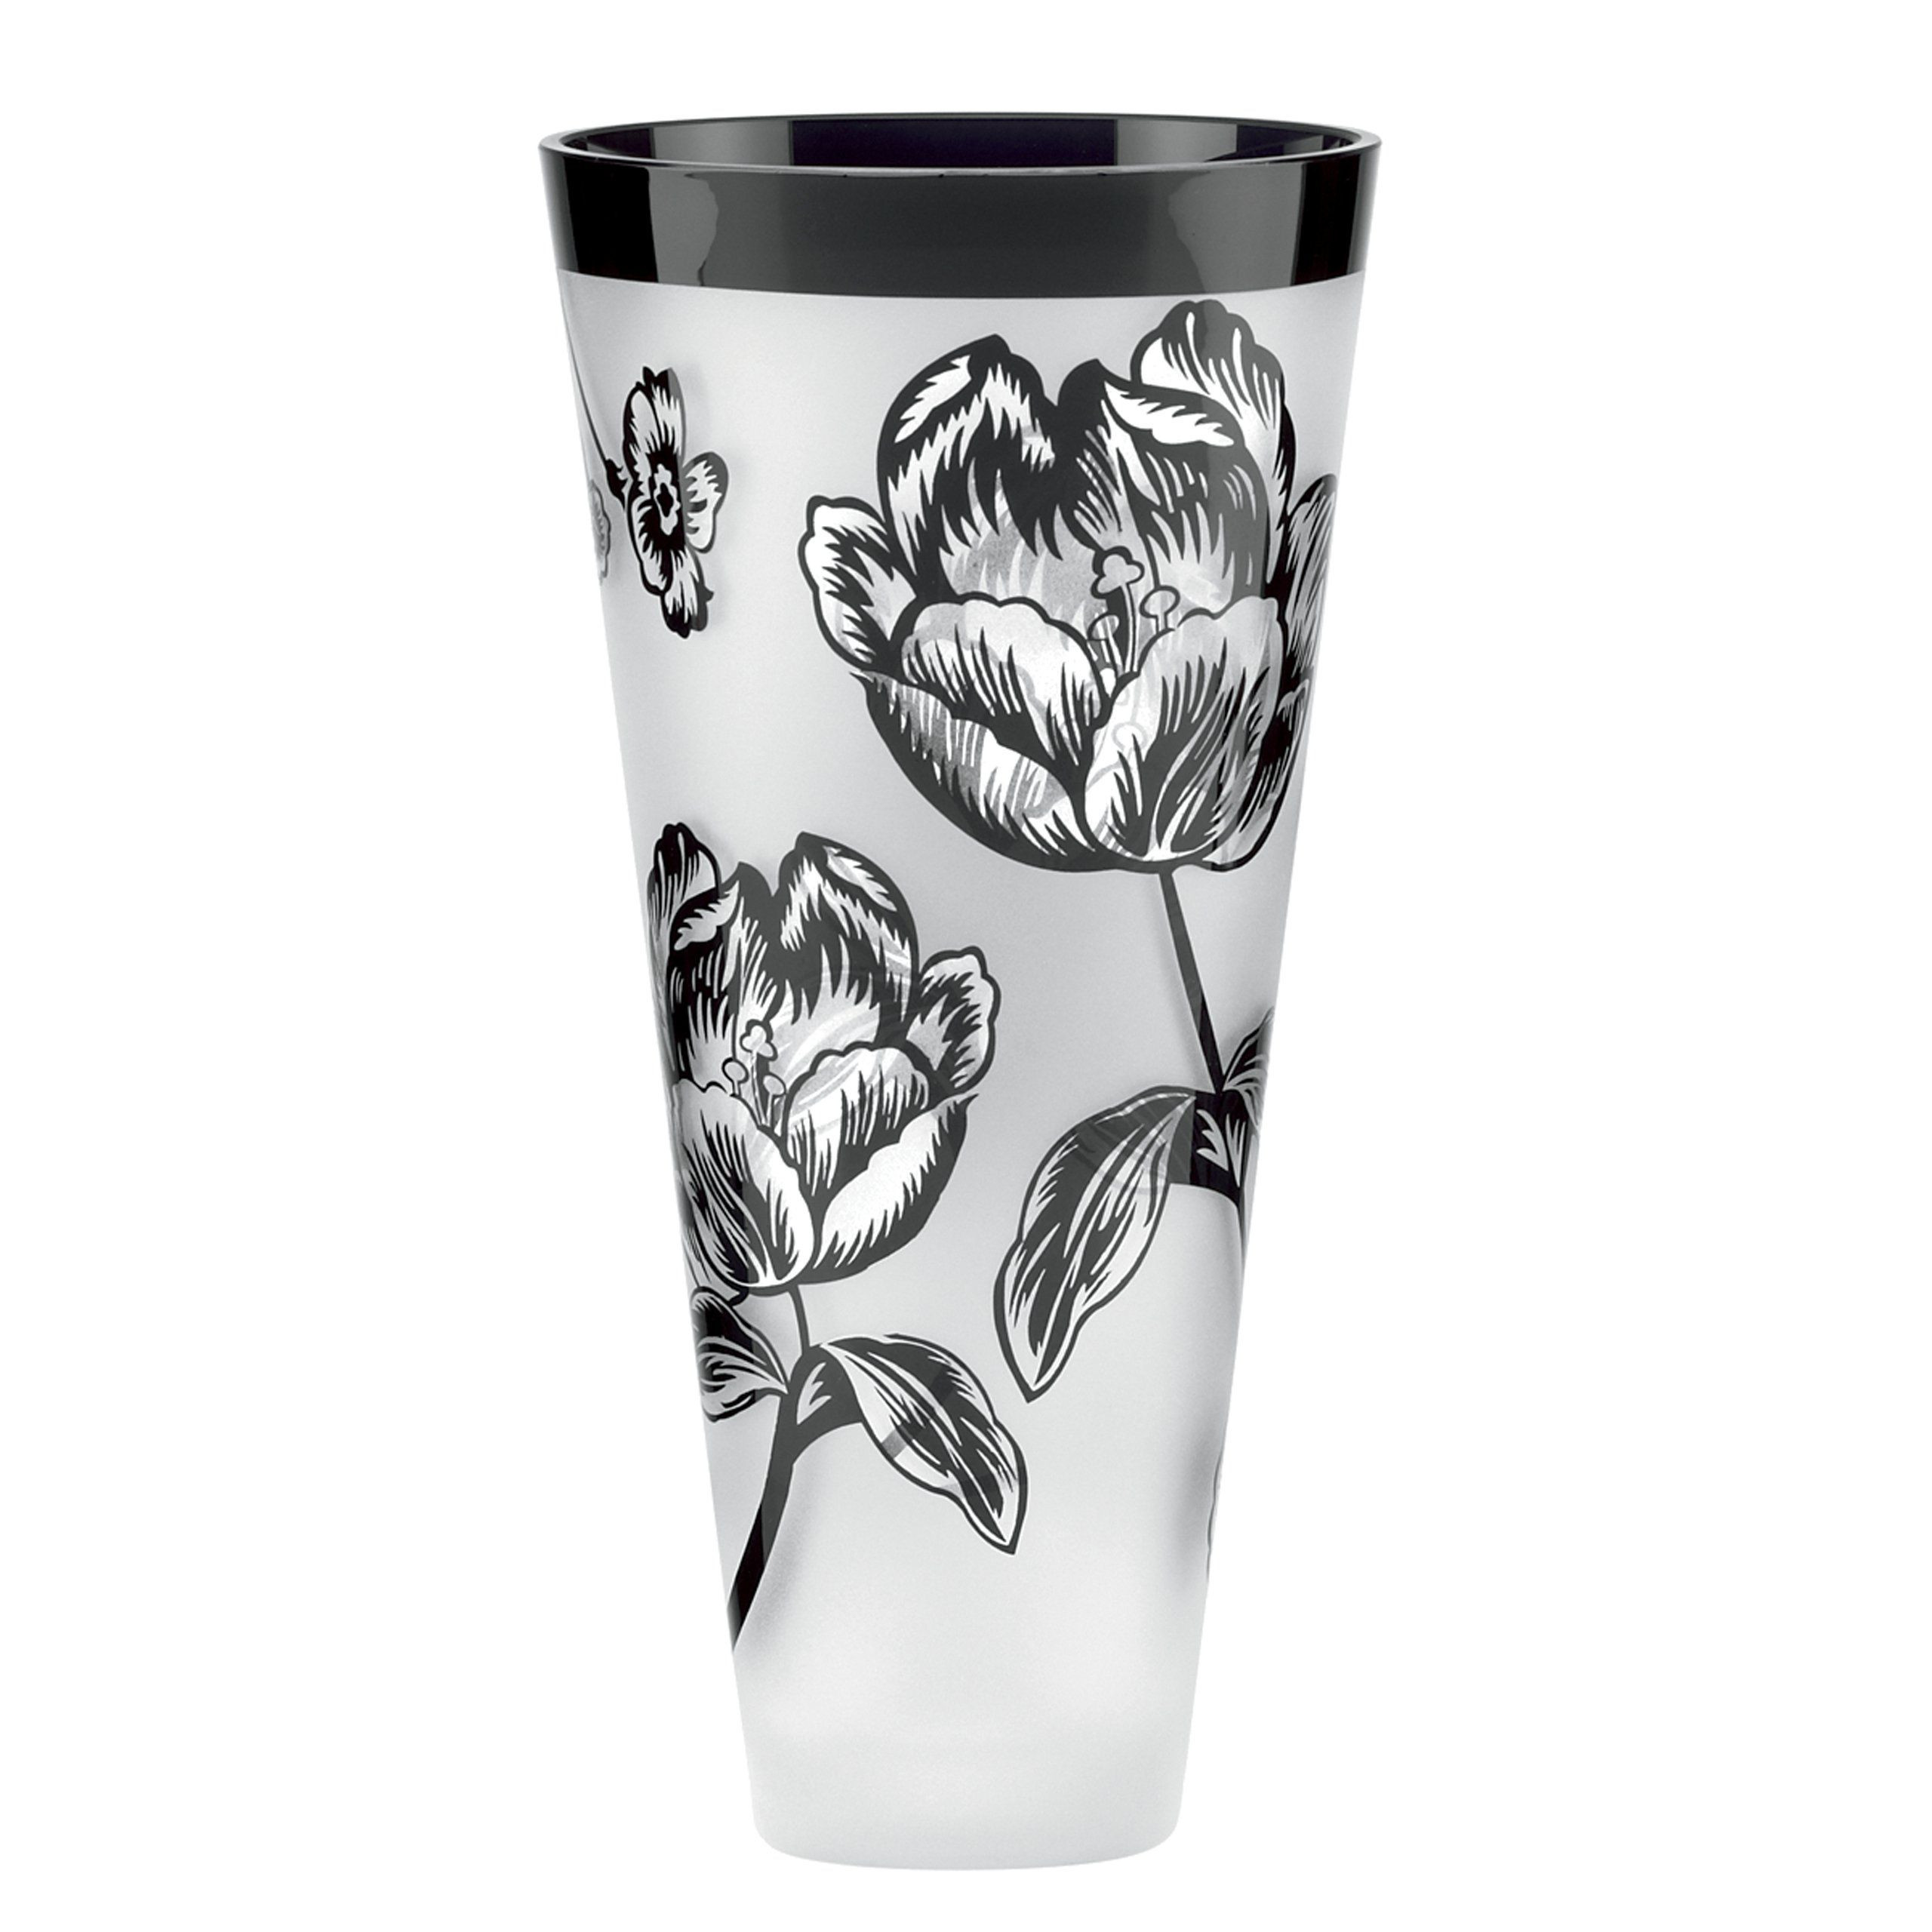 26 Stunning Large Rectangular Vase 2024 free download large rectangular vase of lenox midnight blossom bud vase 8 inch crafted of non lead crystal inside lenox midnight blossom bud vase 8 inch crafted of non lead crystal